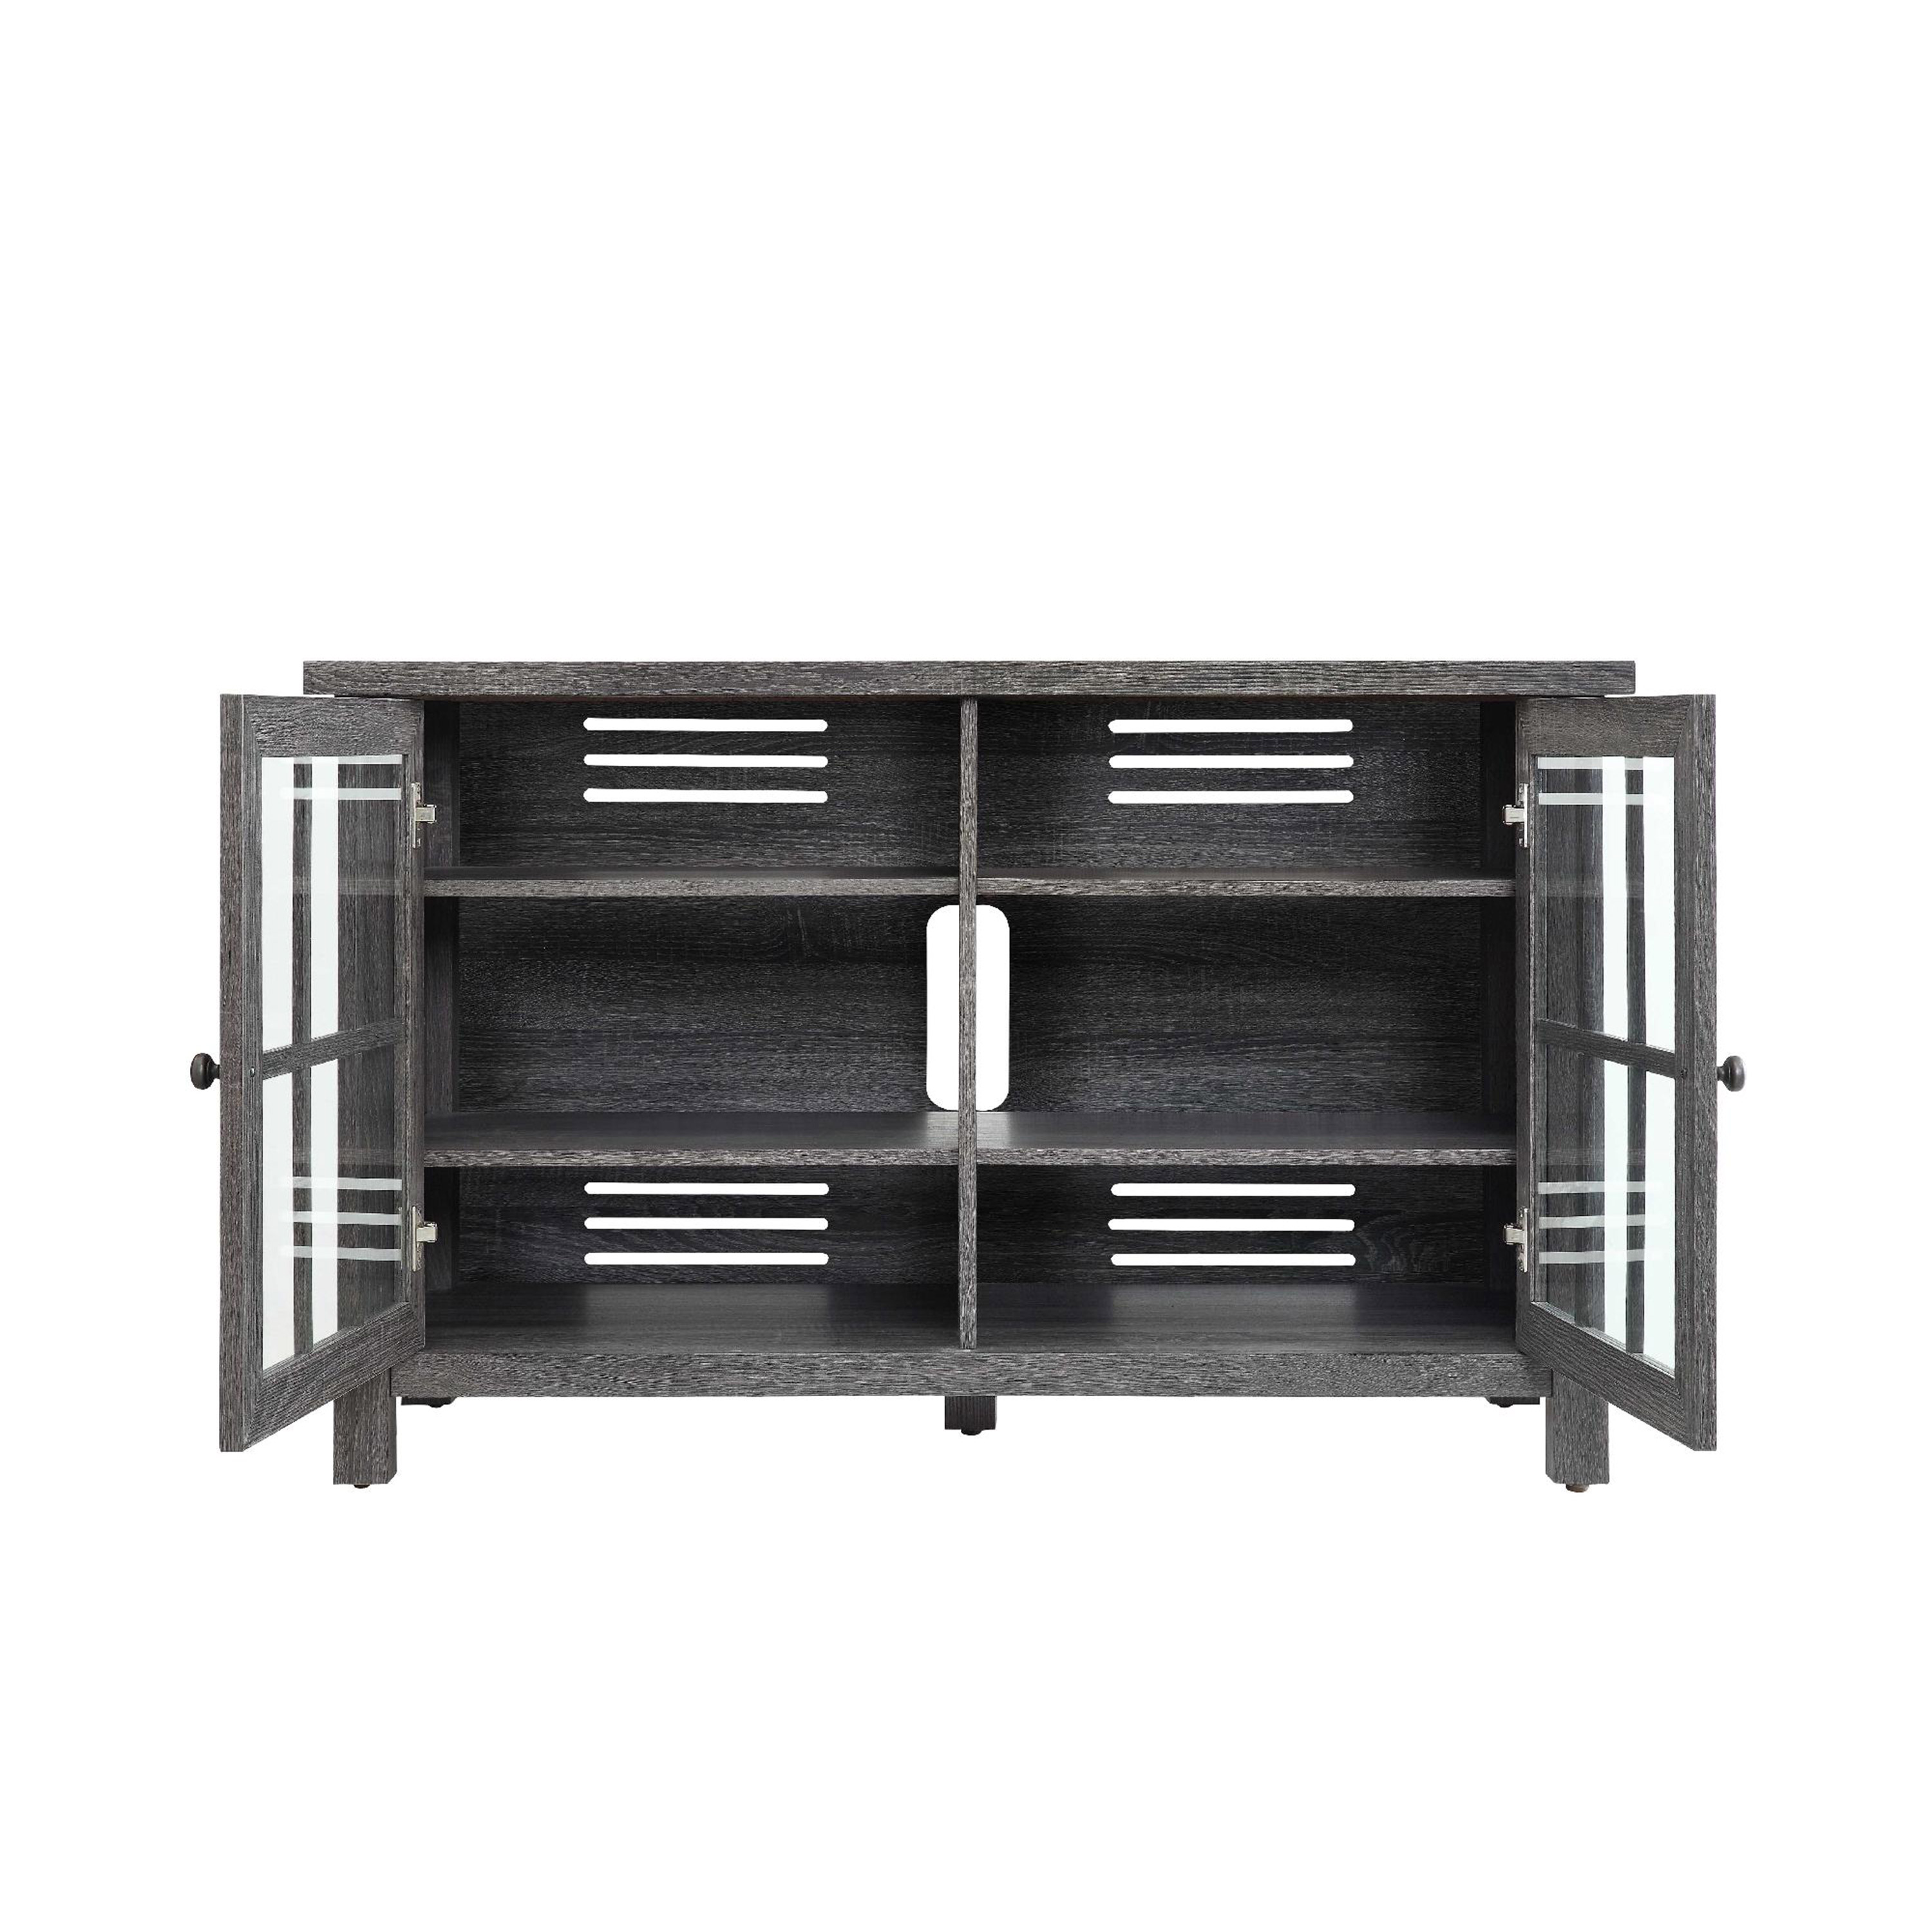 Better Homes & Gardens Oxford Square TV Stand for TVs up to 55", Gray - image 5 of 8